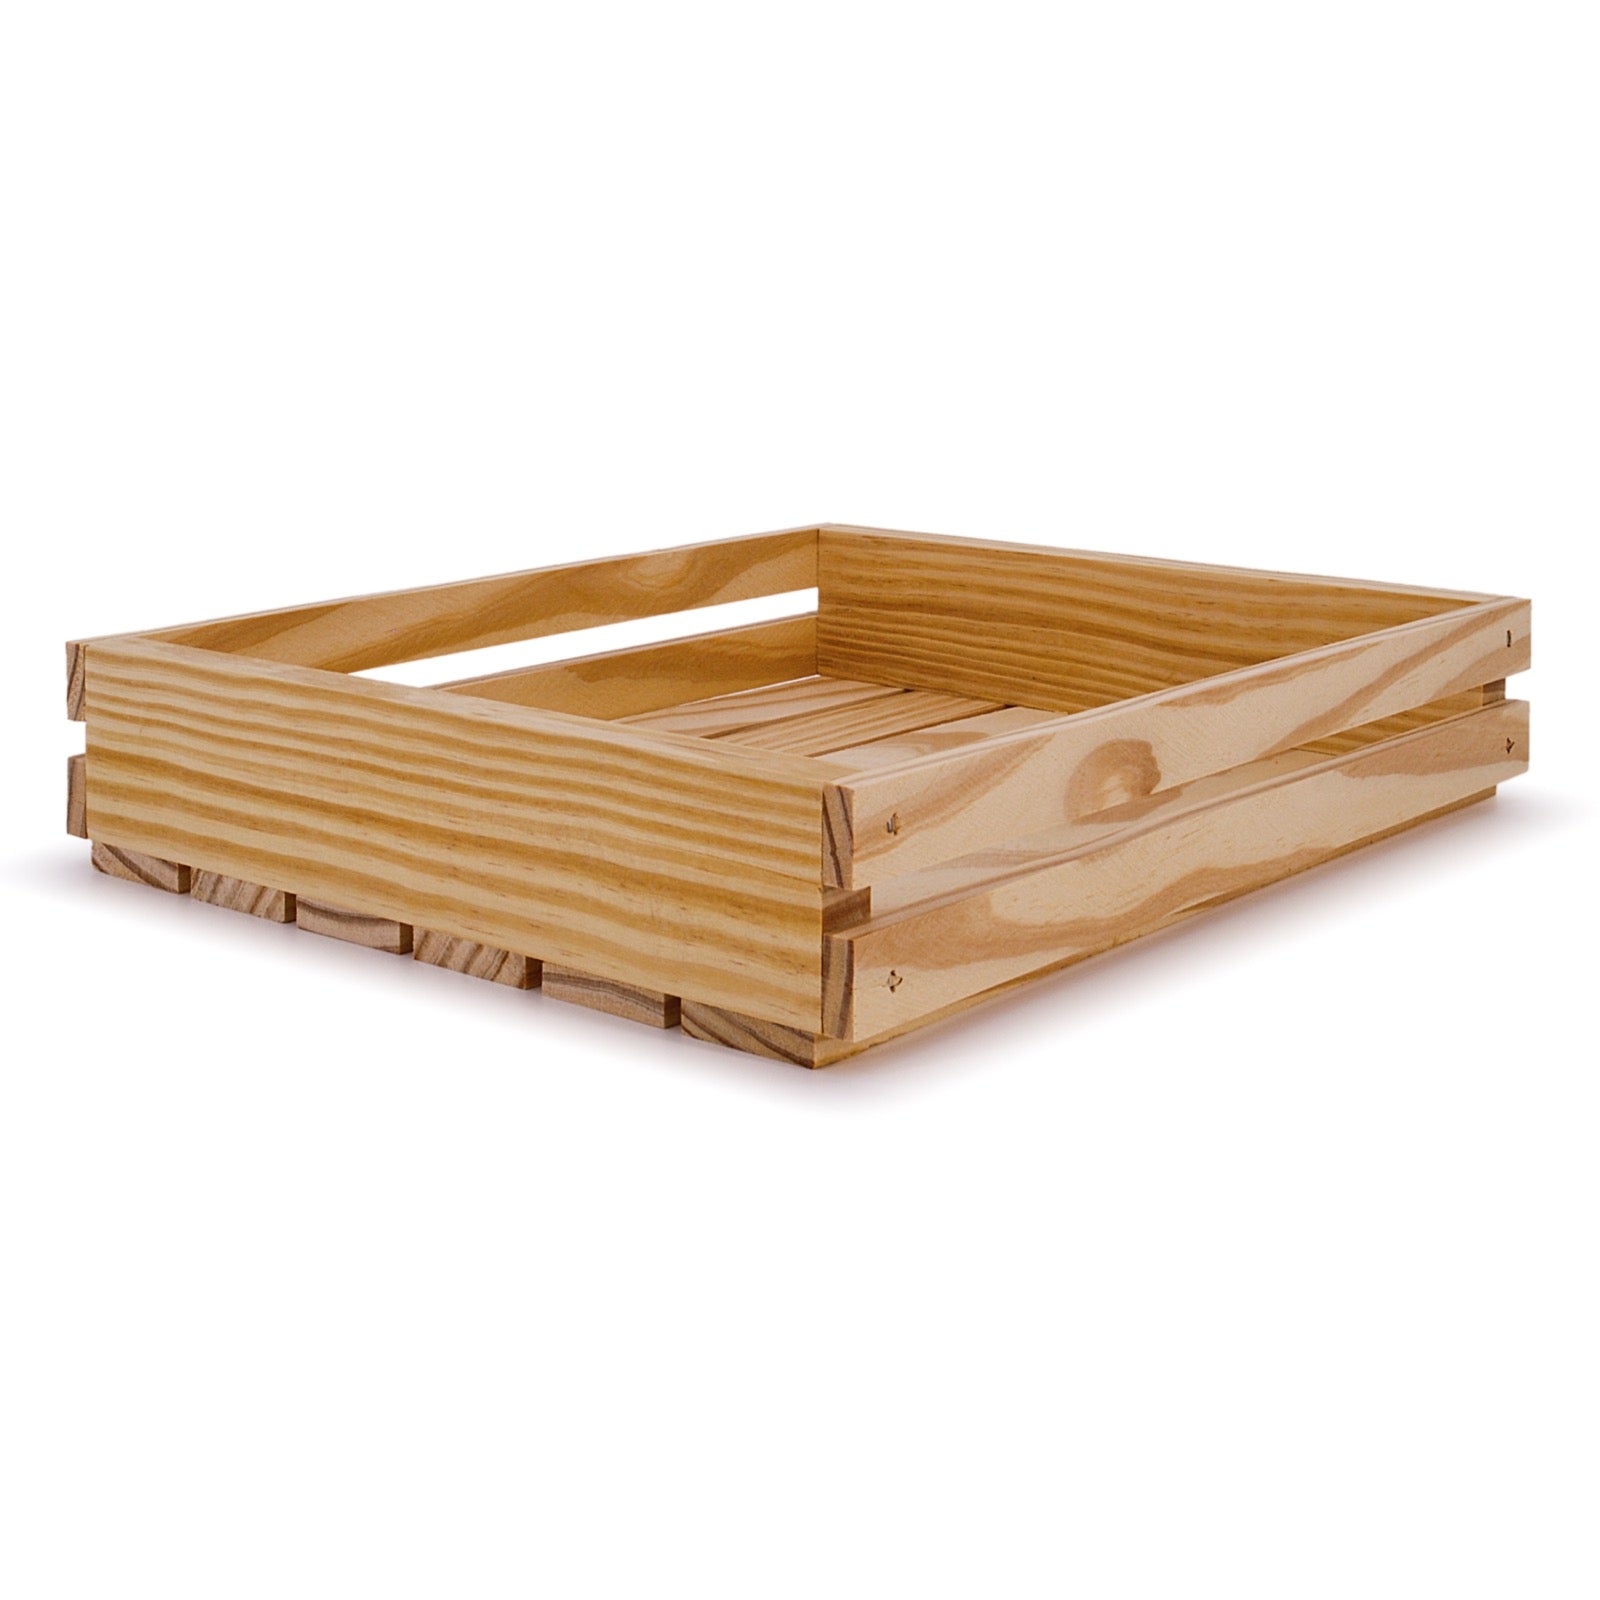 Small wooden crates 14x12x2.5, 6-SS-14-12-2.5-NX-NW-NL, 12-SS-14-12-2.5-NX-NW-NL, 24-SS-14-12-2.5-NX-NW-NL, 48-SS-14-12-2.5-NX-NW-NL, 96-SS-14-12-2.5-NX-NW-NL